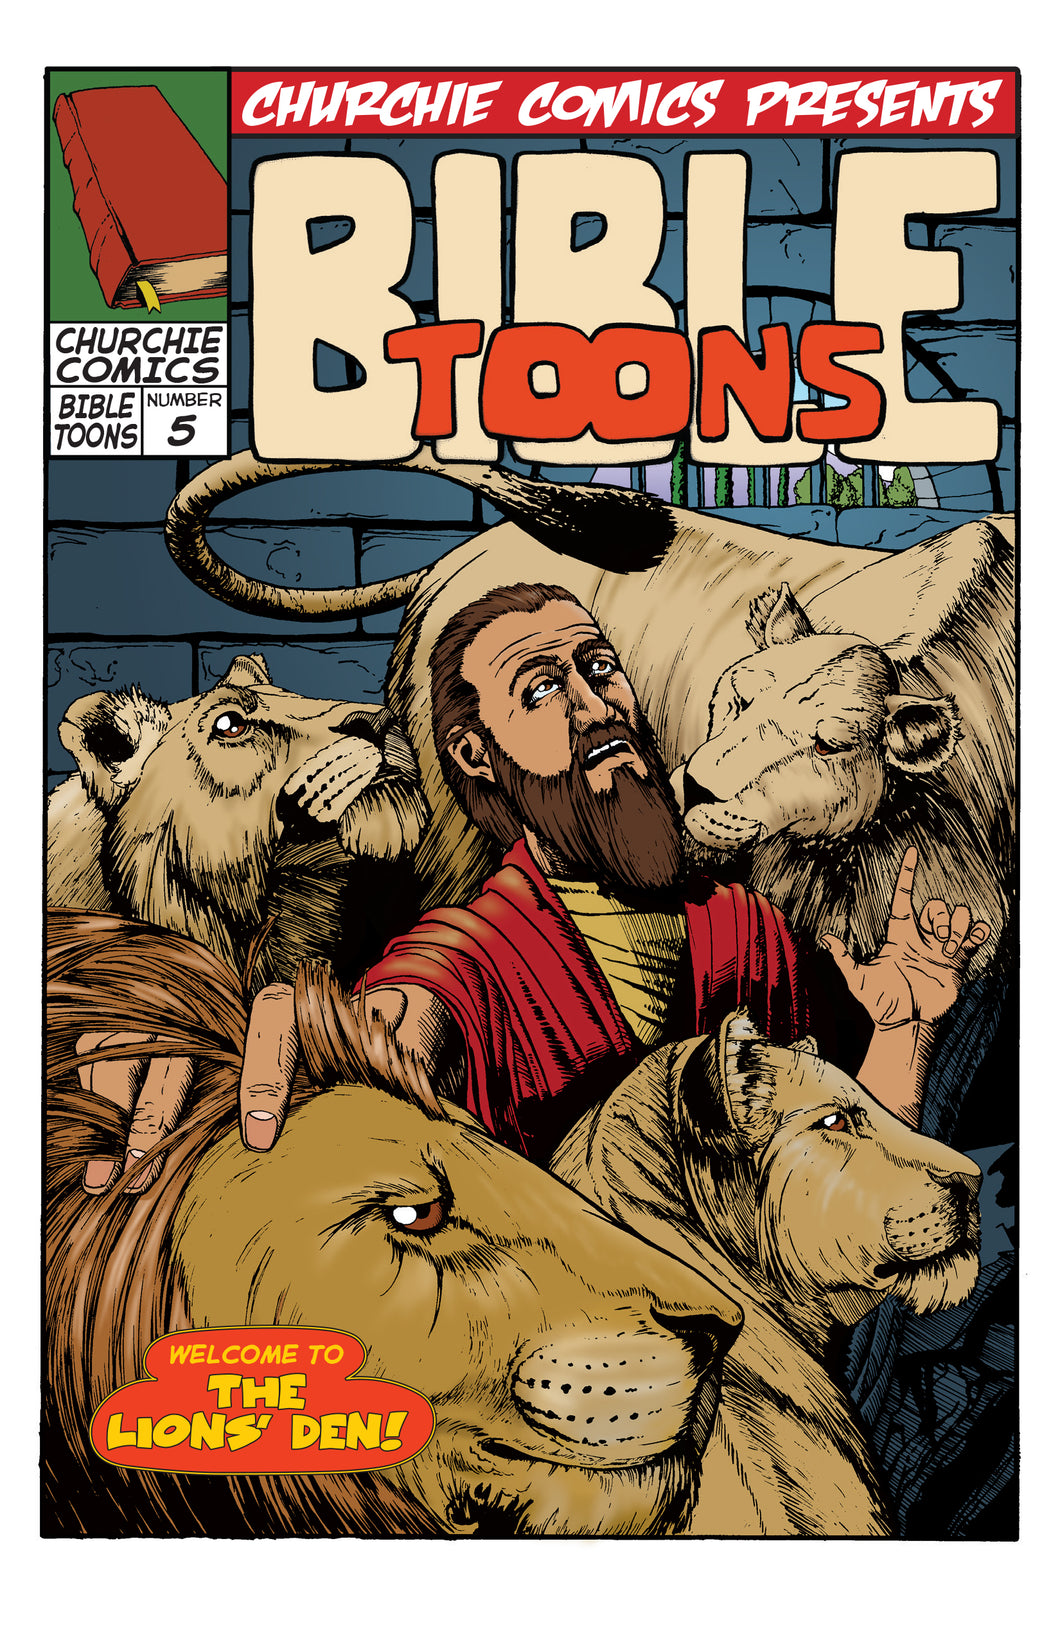 Bible-toons #05 - Daniel and the Lions' Den